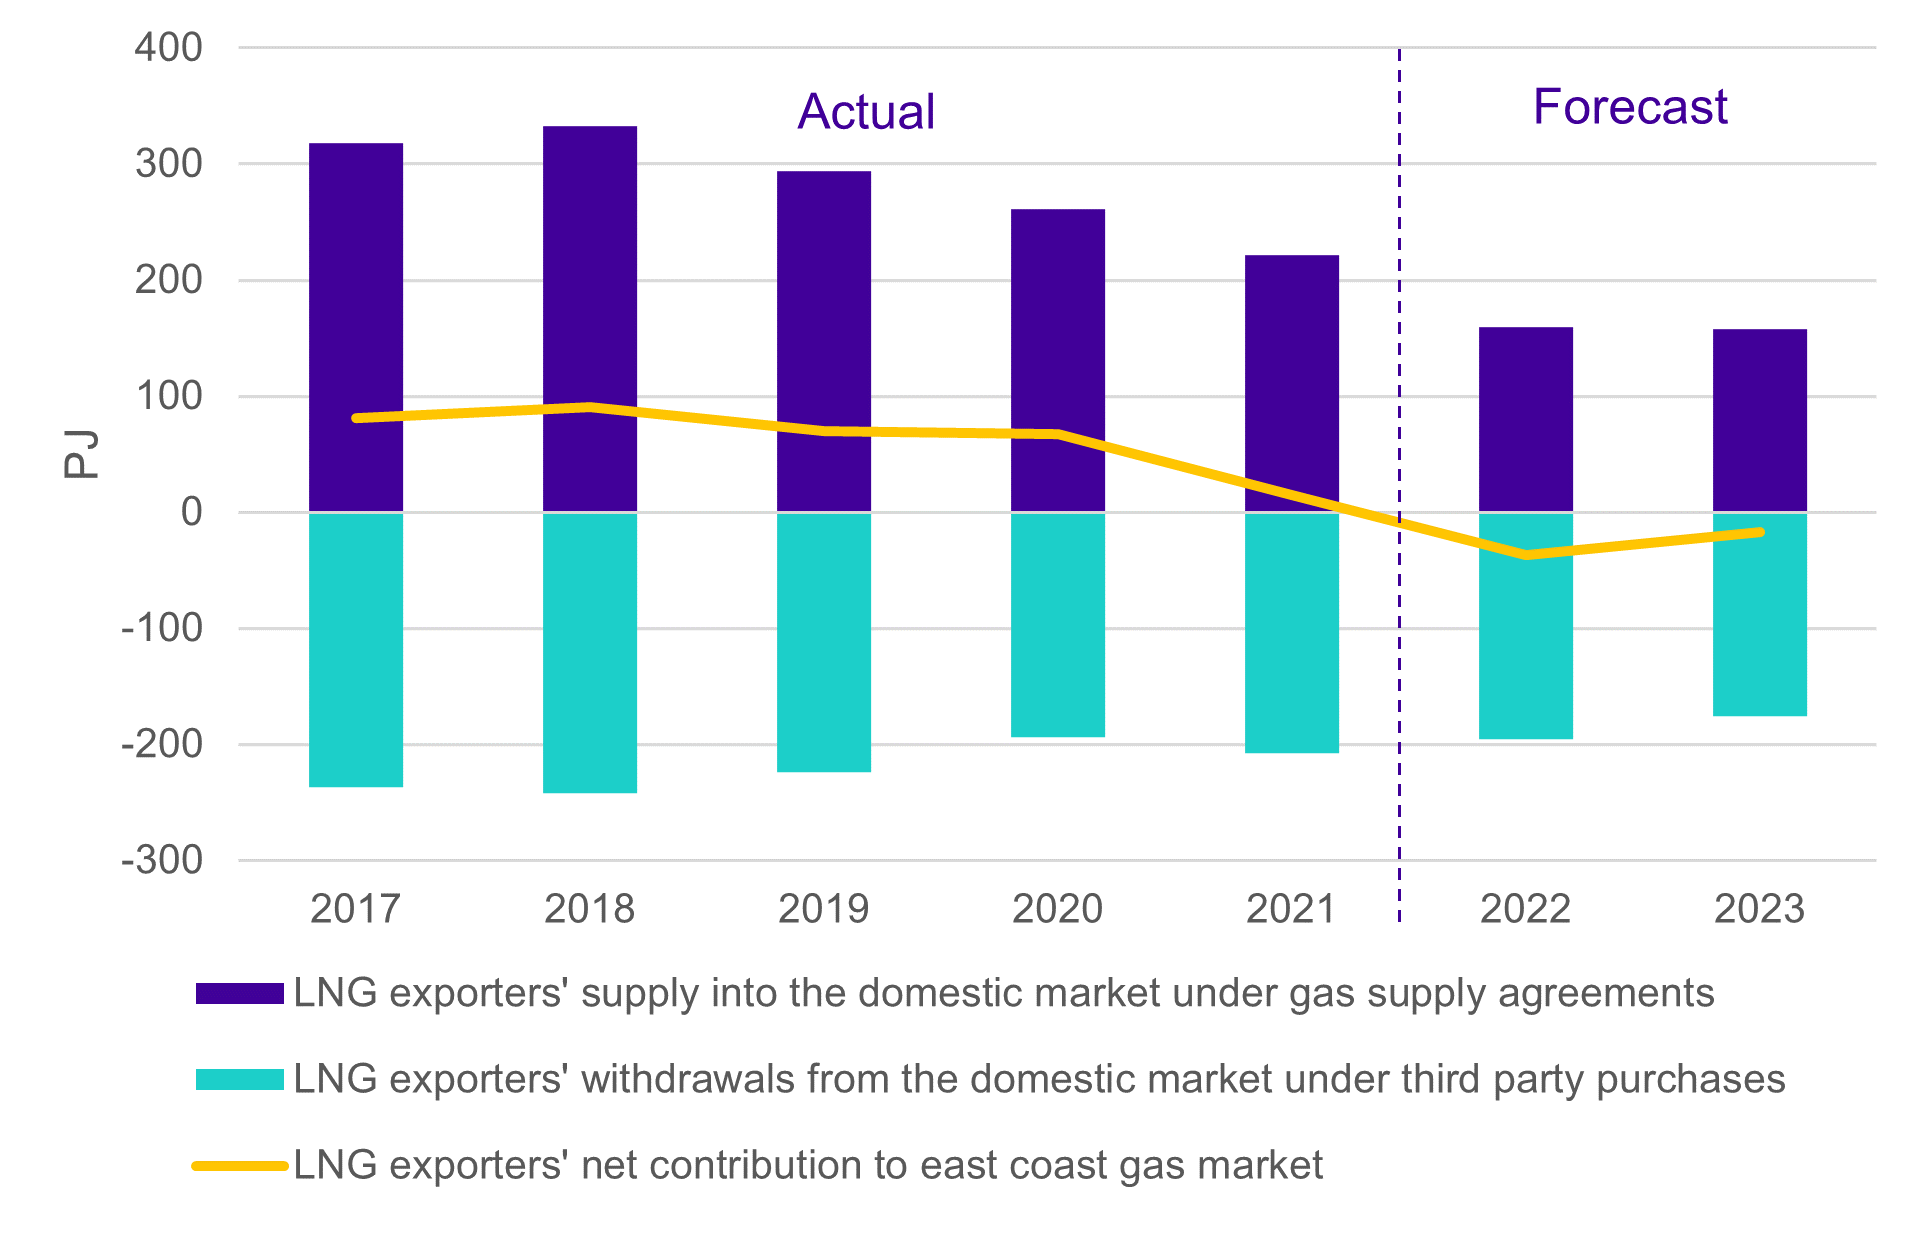 Since 2021 the LNG producers have been net withdrawers of gas from the domestic market, which has worsened the gas shortfall.